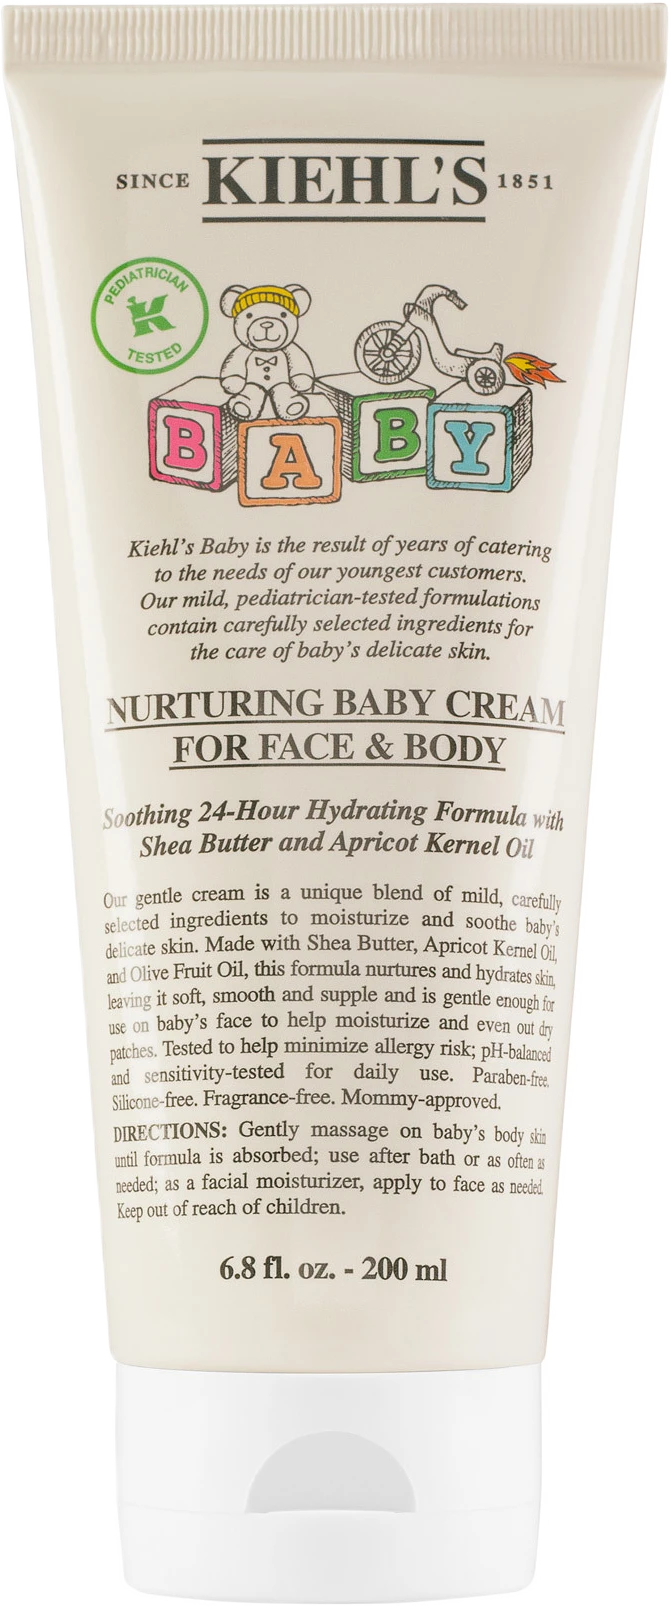 Nuturing Baby Cream for Face & Body